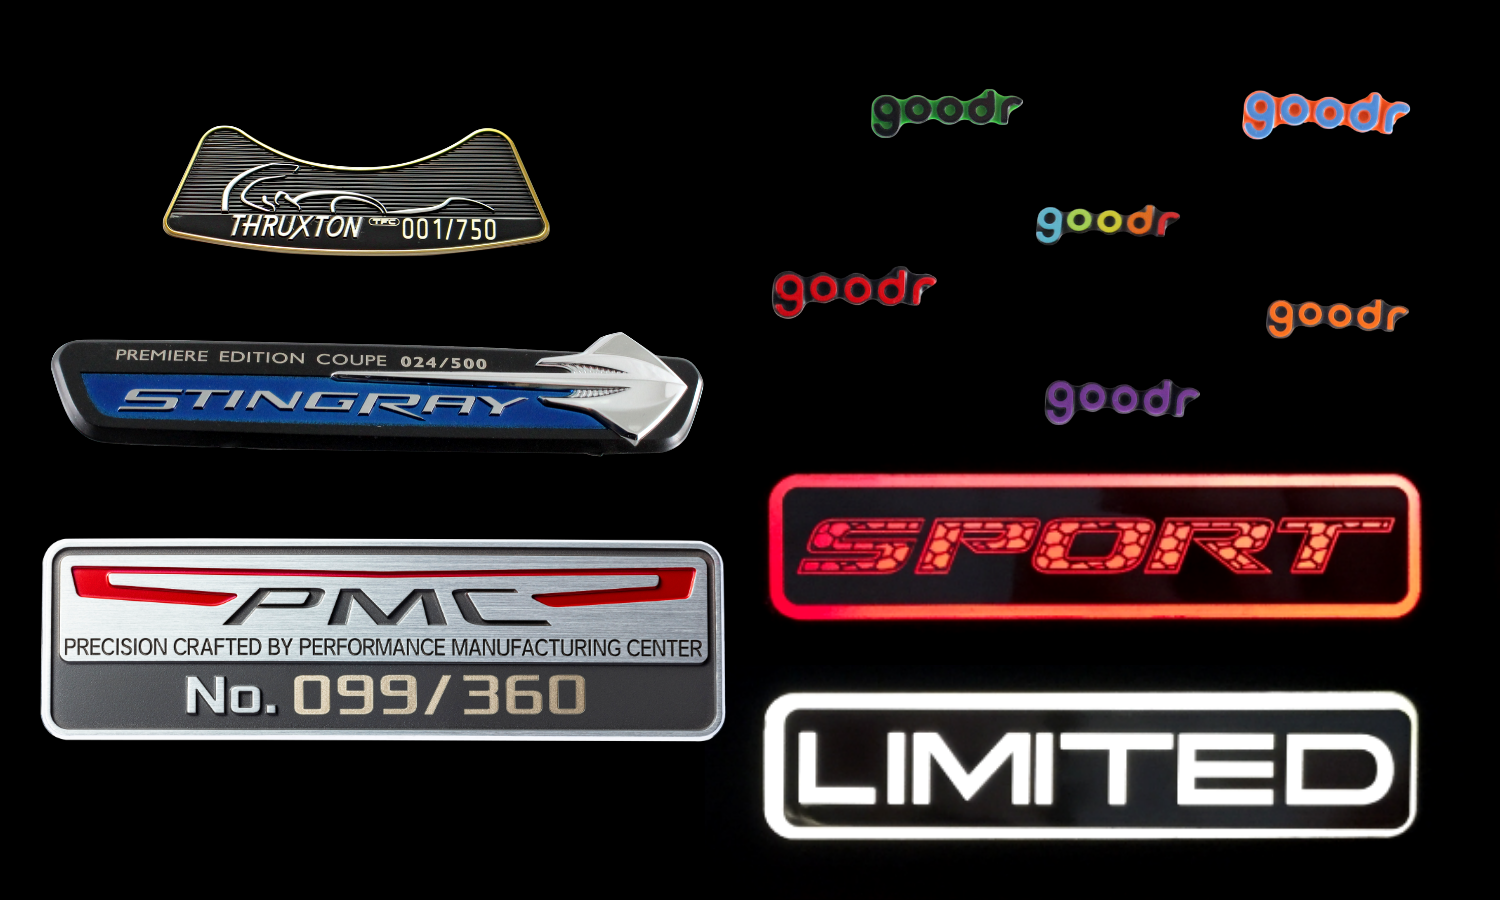 goodr sunglass name plates shown in multiple colors like blue, red, purple, rainbow, orange, green; illuminated name plates with red lights with SPORT text; illuminated name plate with white light and LIMITED text; serialized name plate showing one of x number of units sold